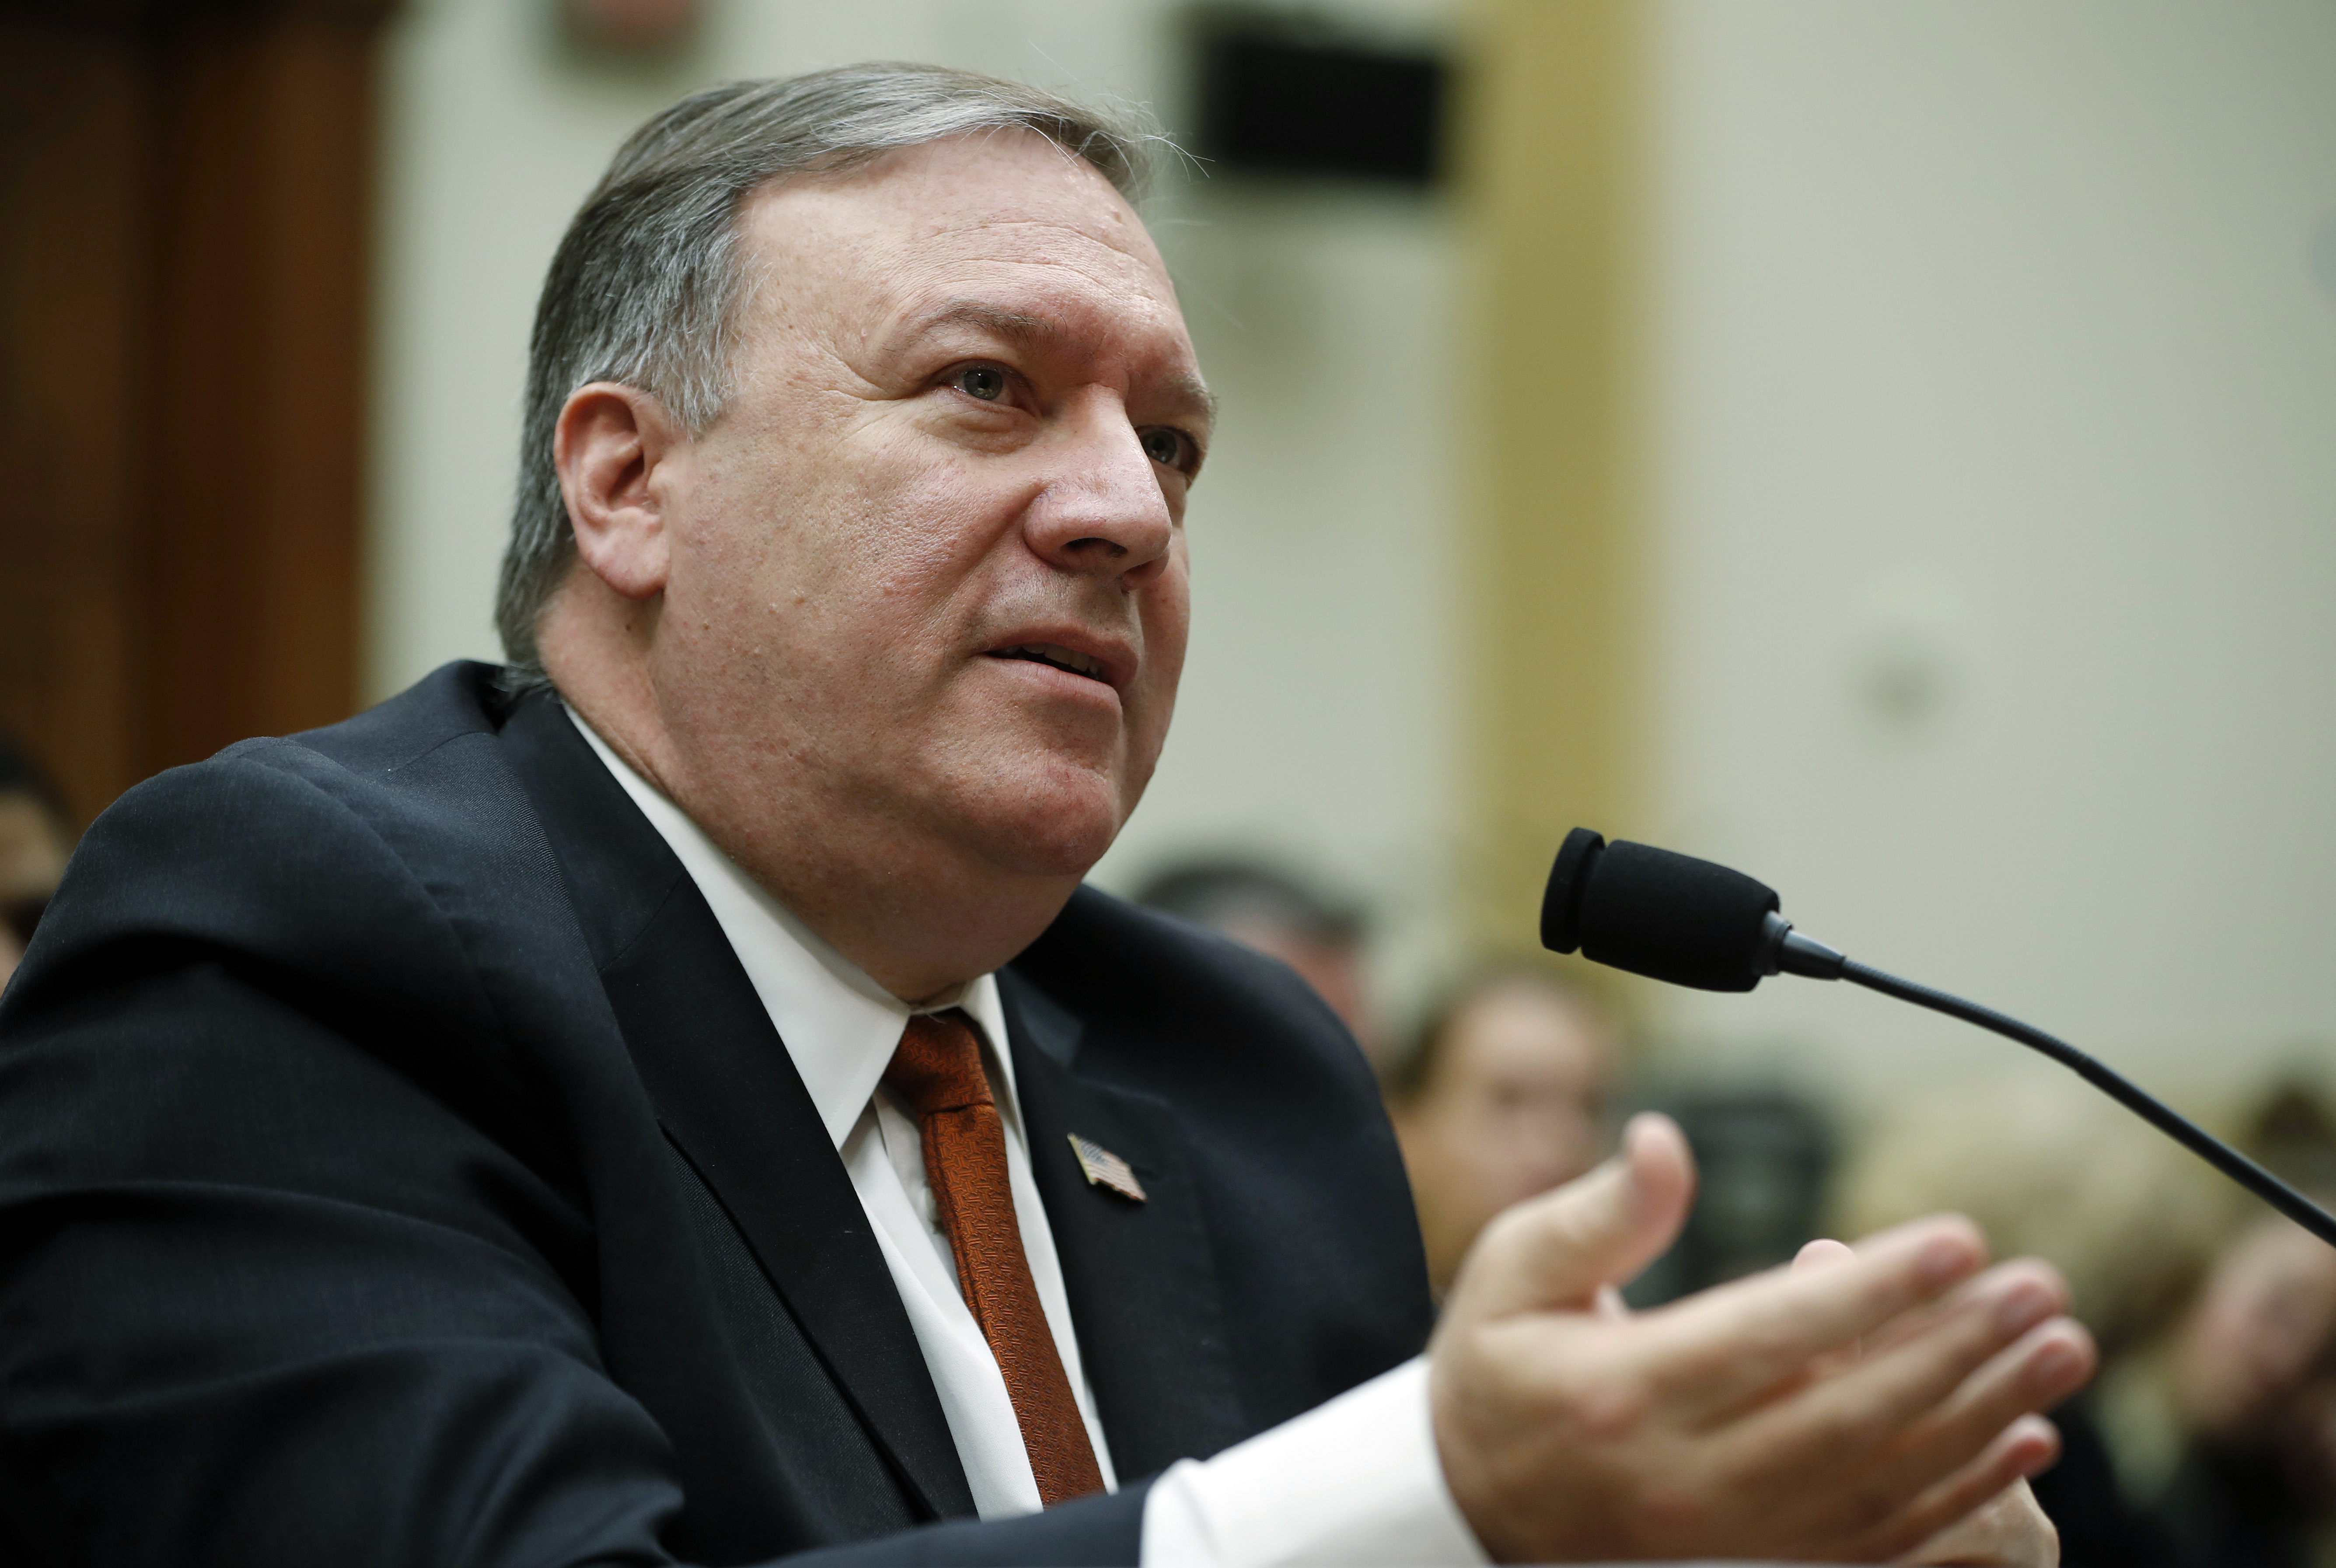 US secretary of state Mike Pompeo testifies before the House foreign affairs committee